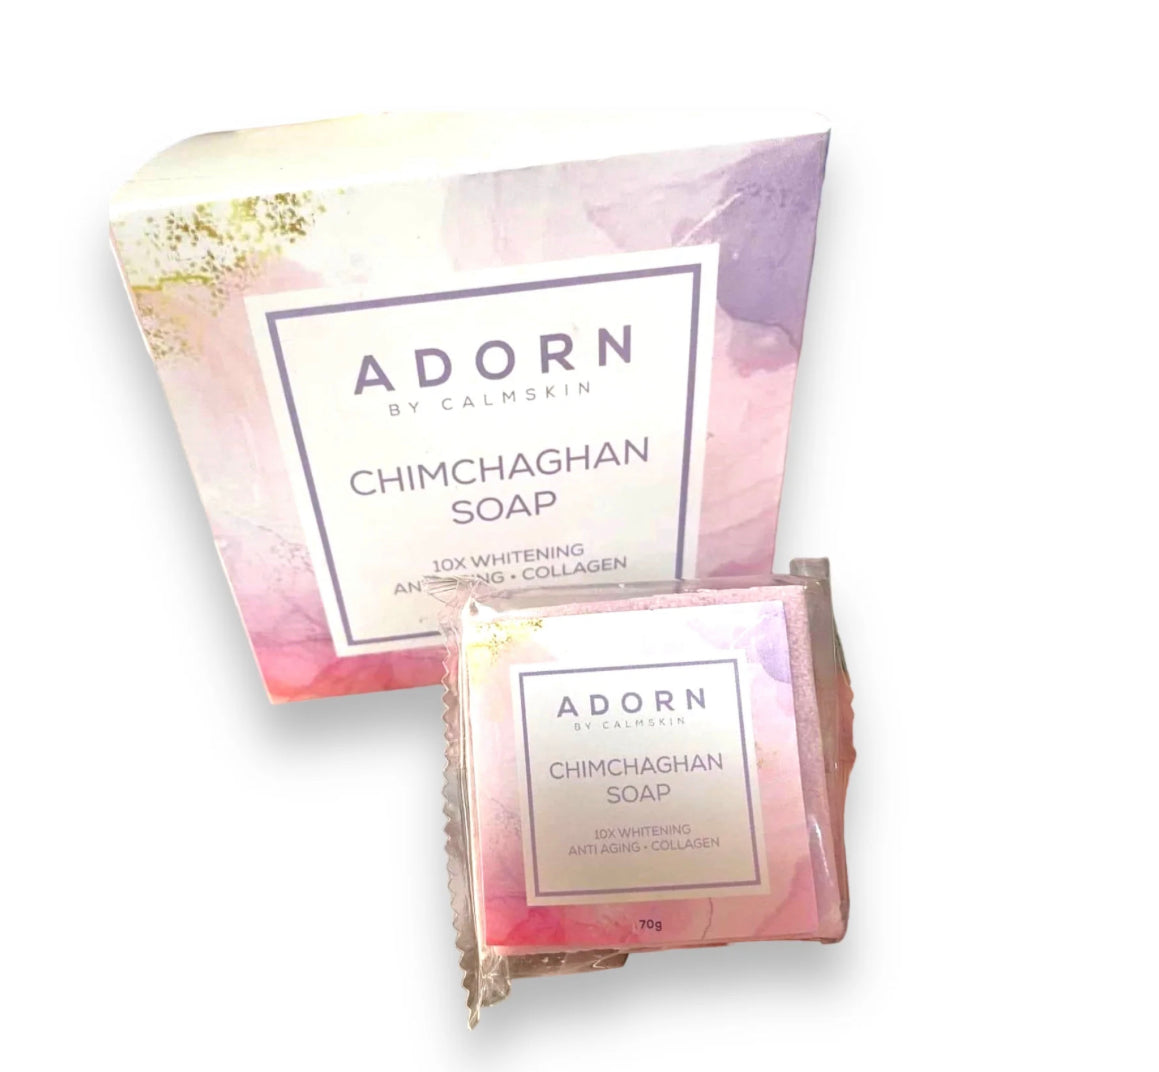 Adorn by.calmskin -Chimchaghan Soap 10x Whitening & Anti-aging collagen -70g